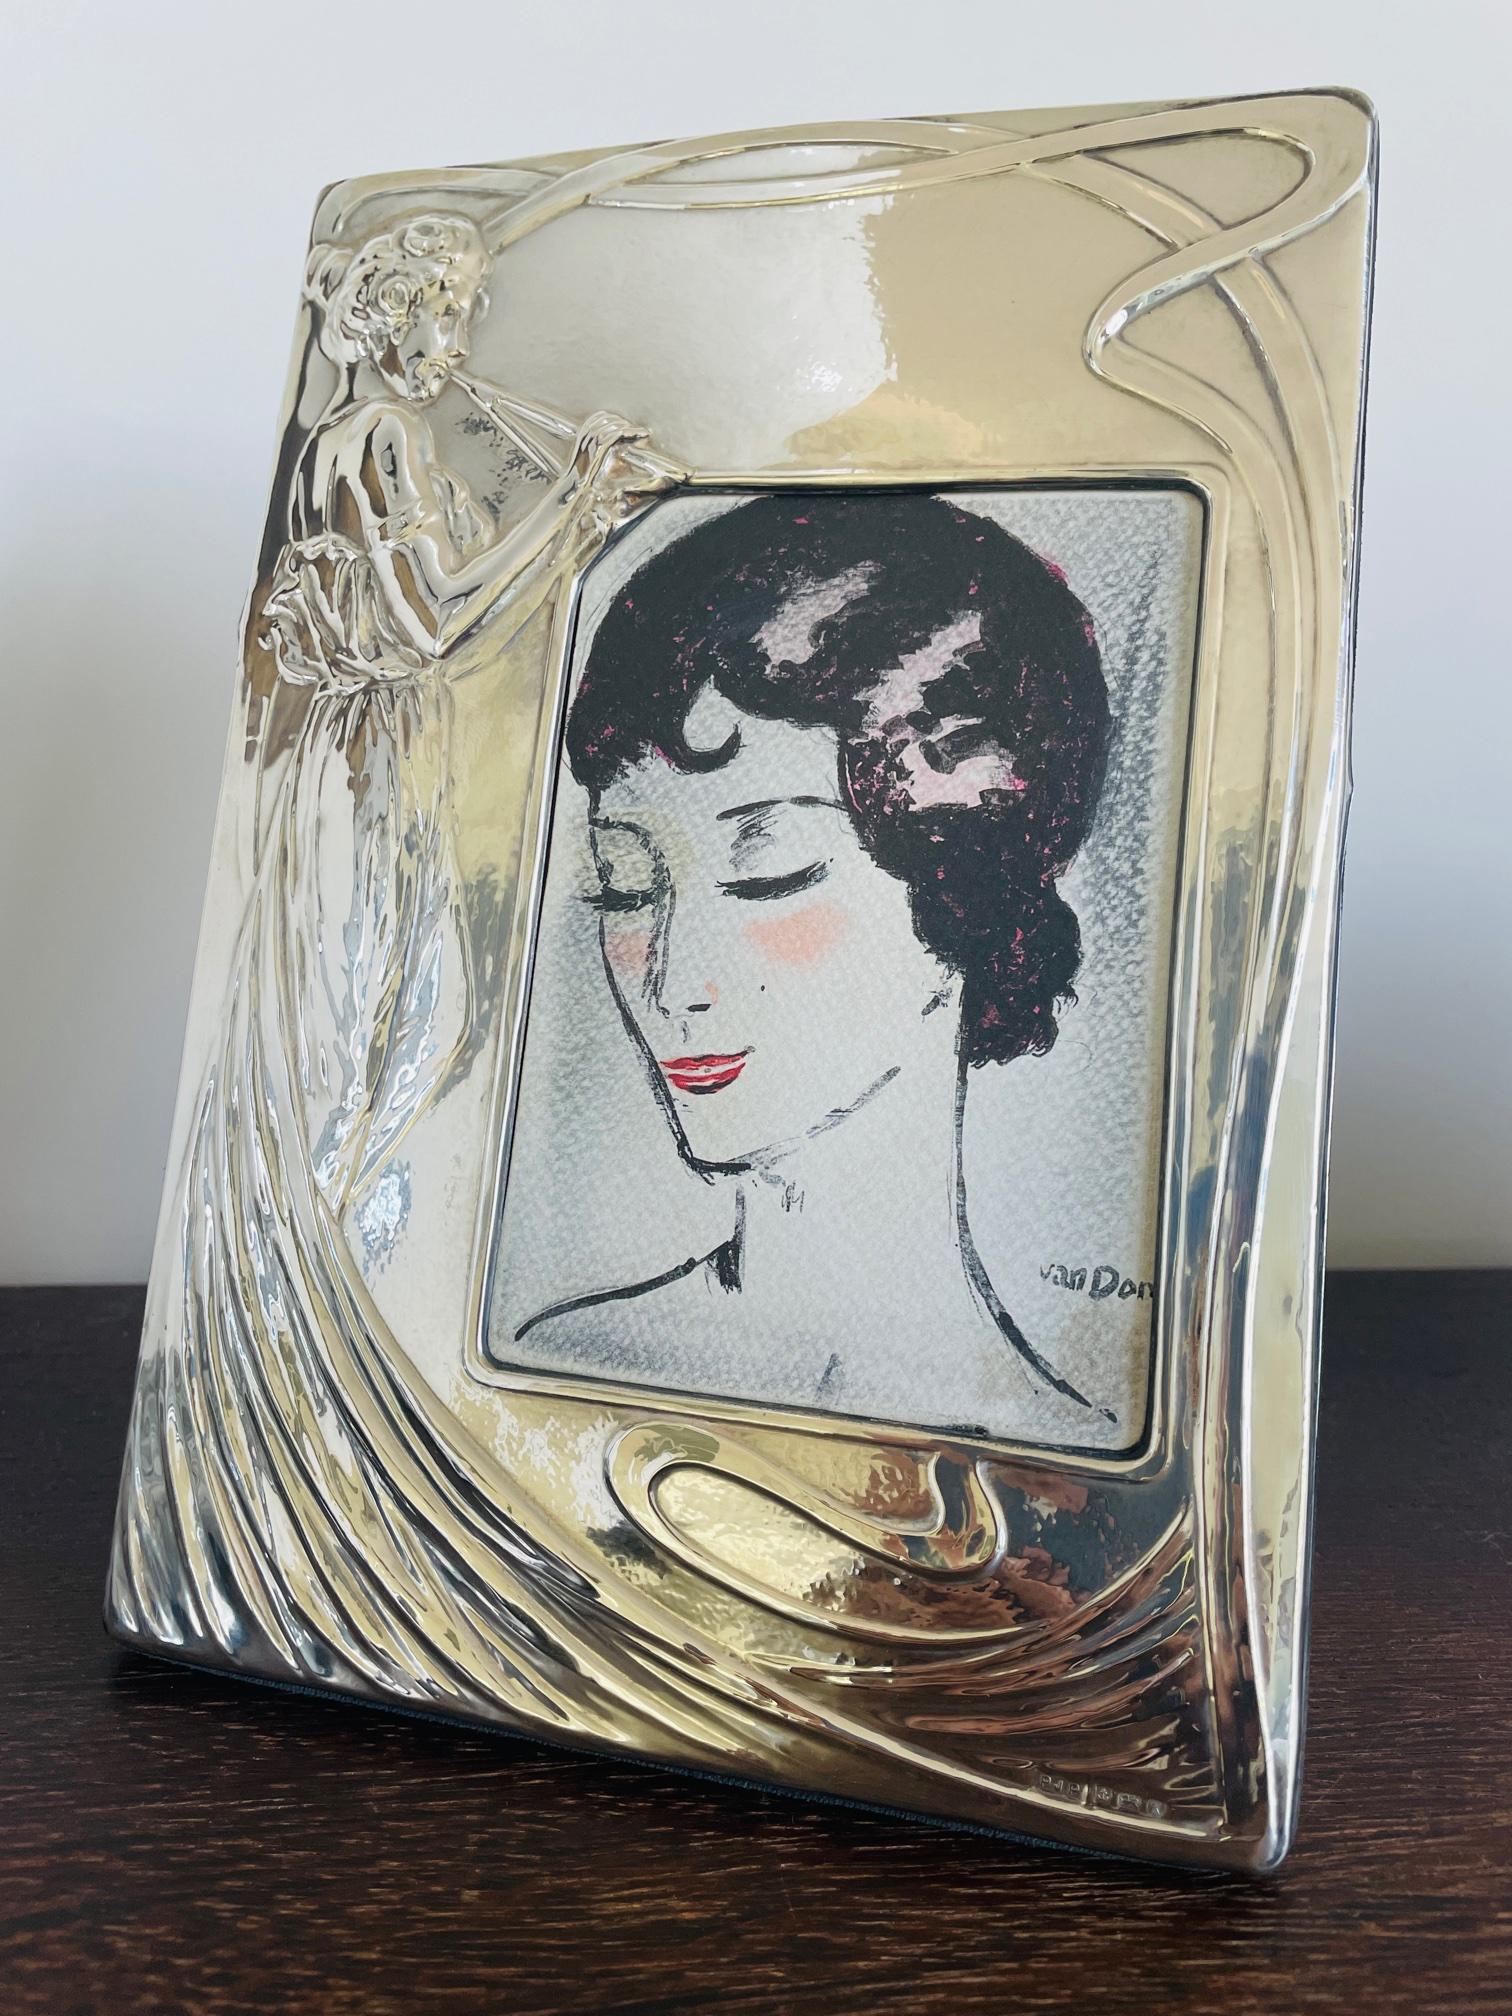 What an eyecatcher. This rare vintage French Art Nouveau photoframe is a must have for every collector of Art Nouveau / Jugendstil items. Made from English sterling silver and in absolute stunning condition. It's made of silver leaf with decorations